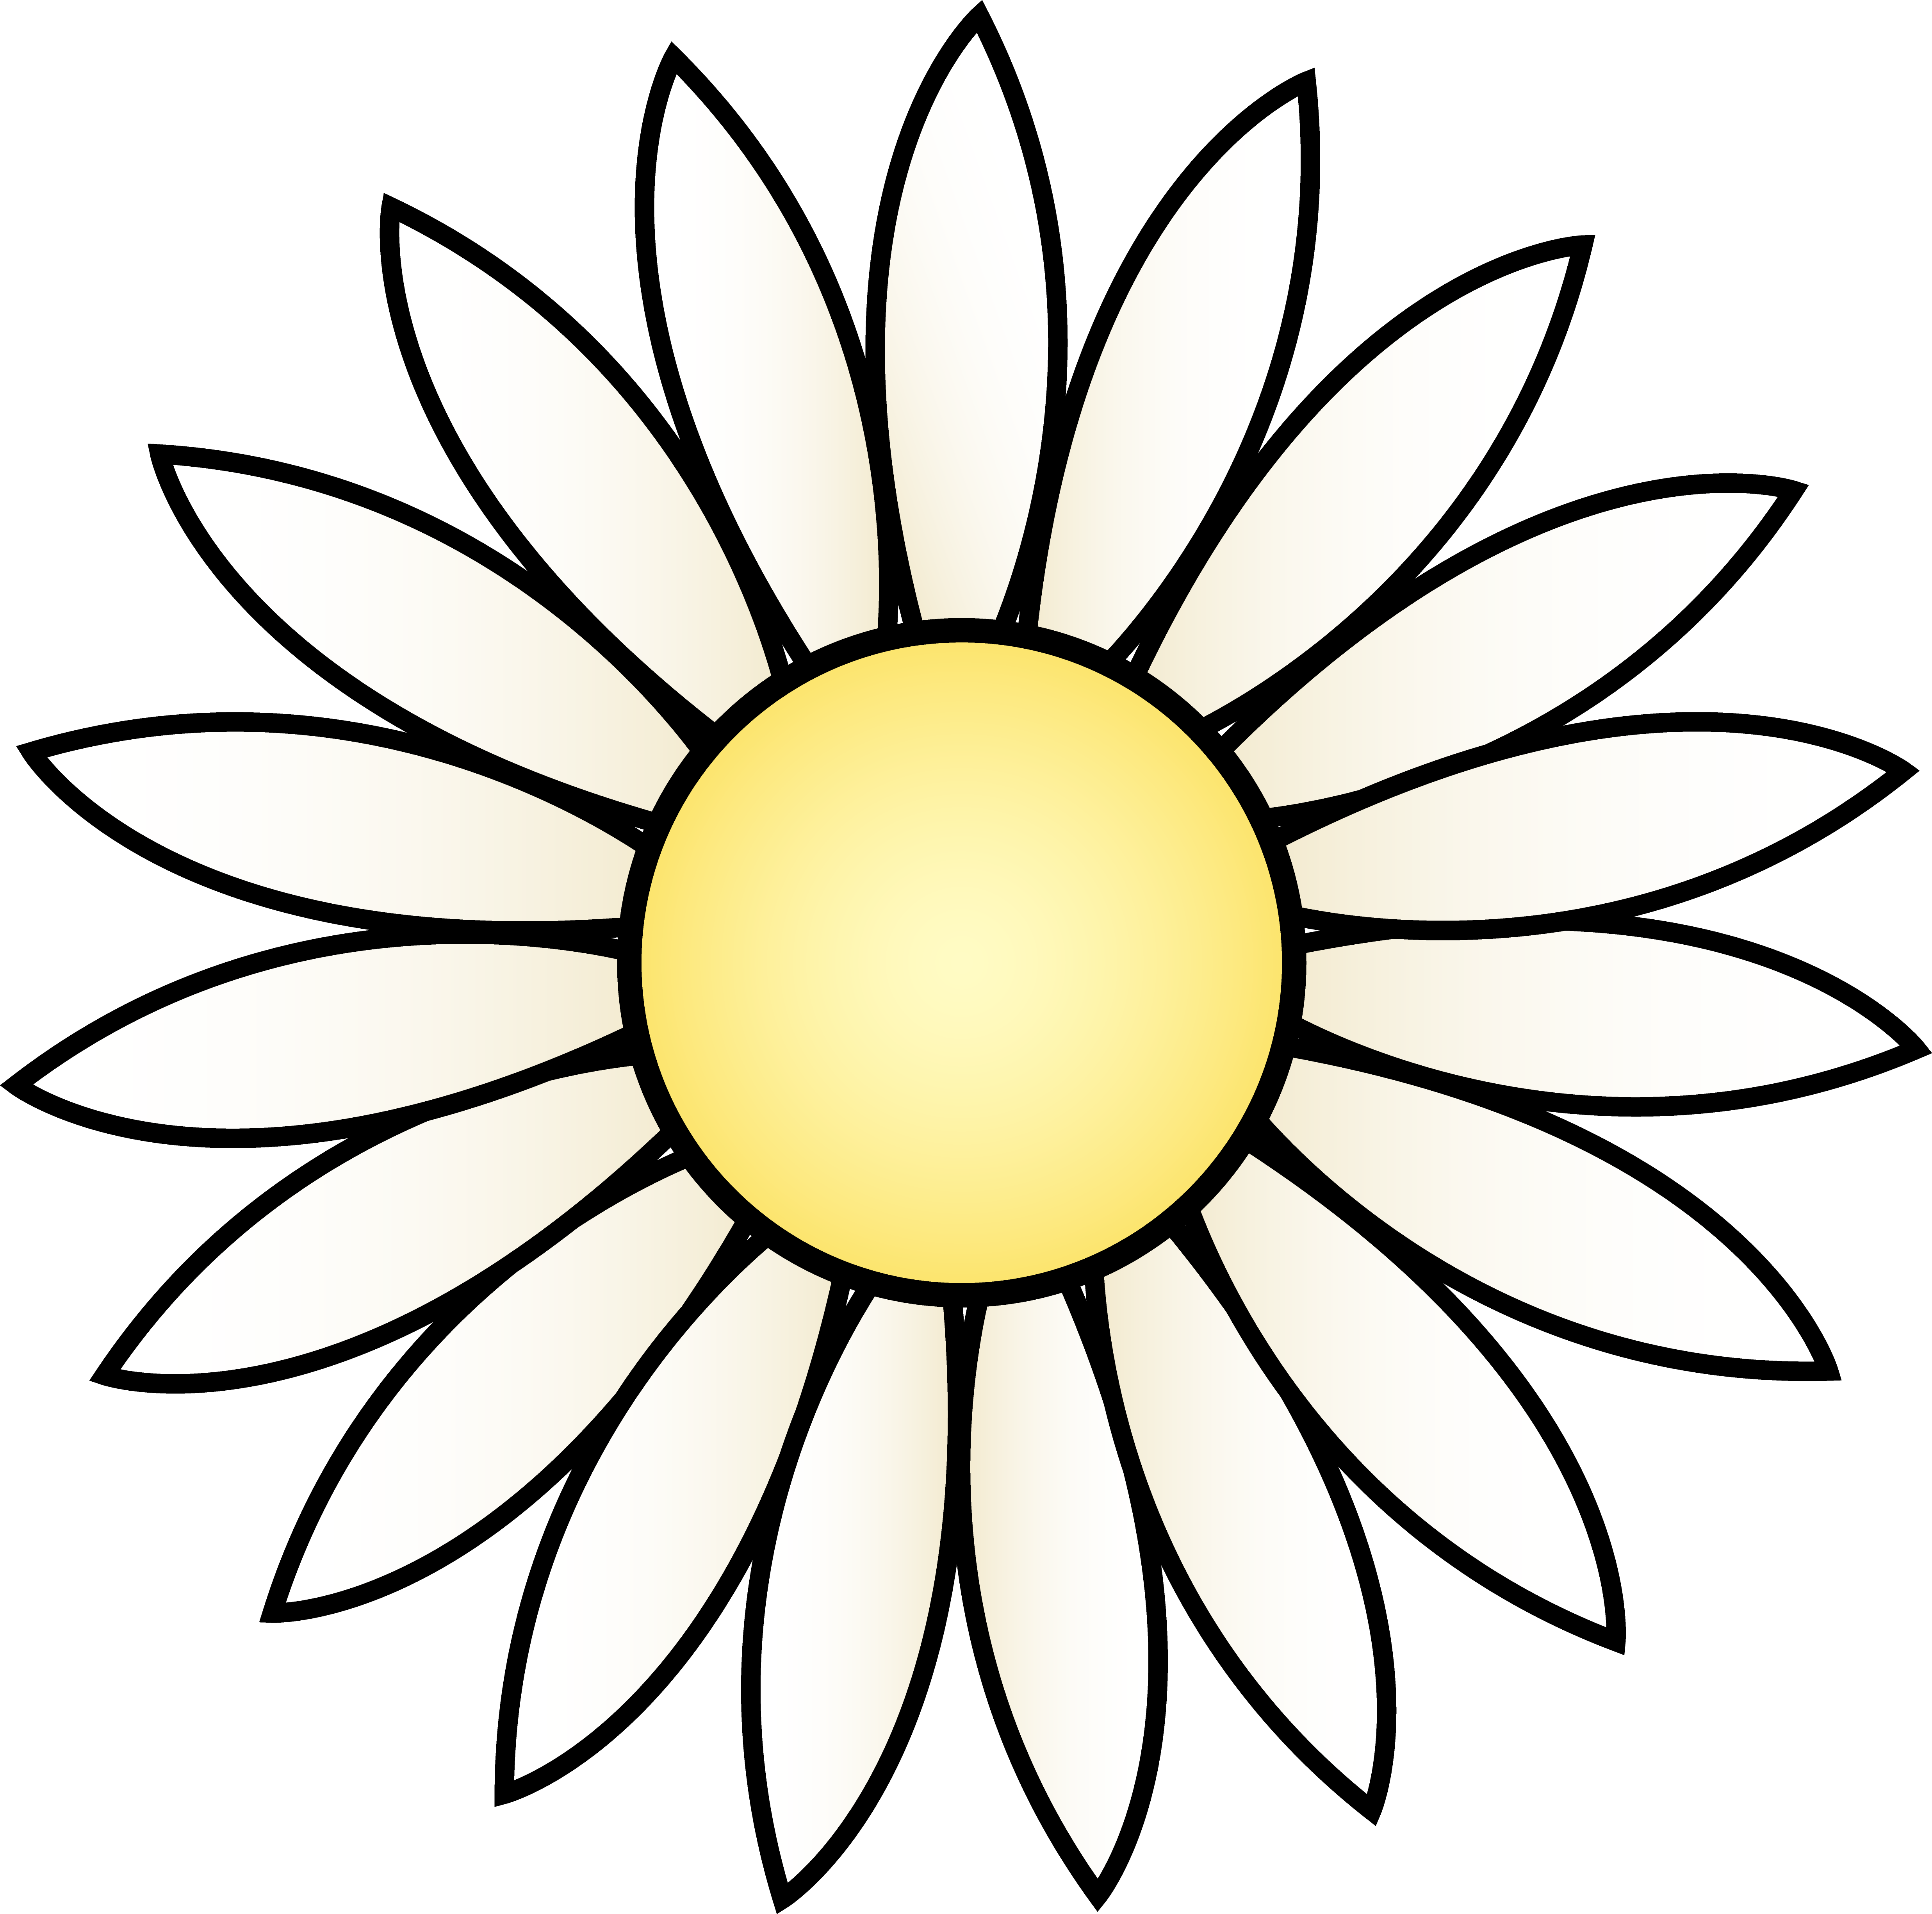 daisy clipart black and white - Daisy Clipart Black And White